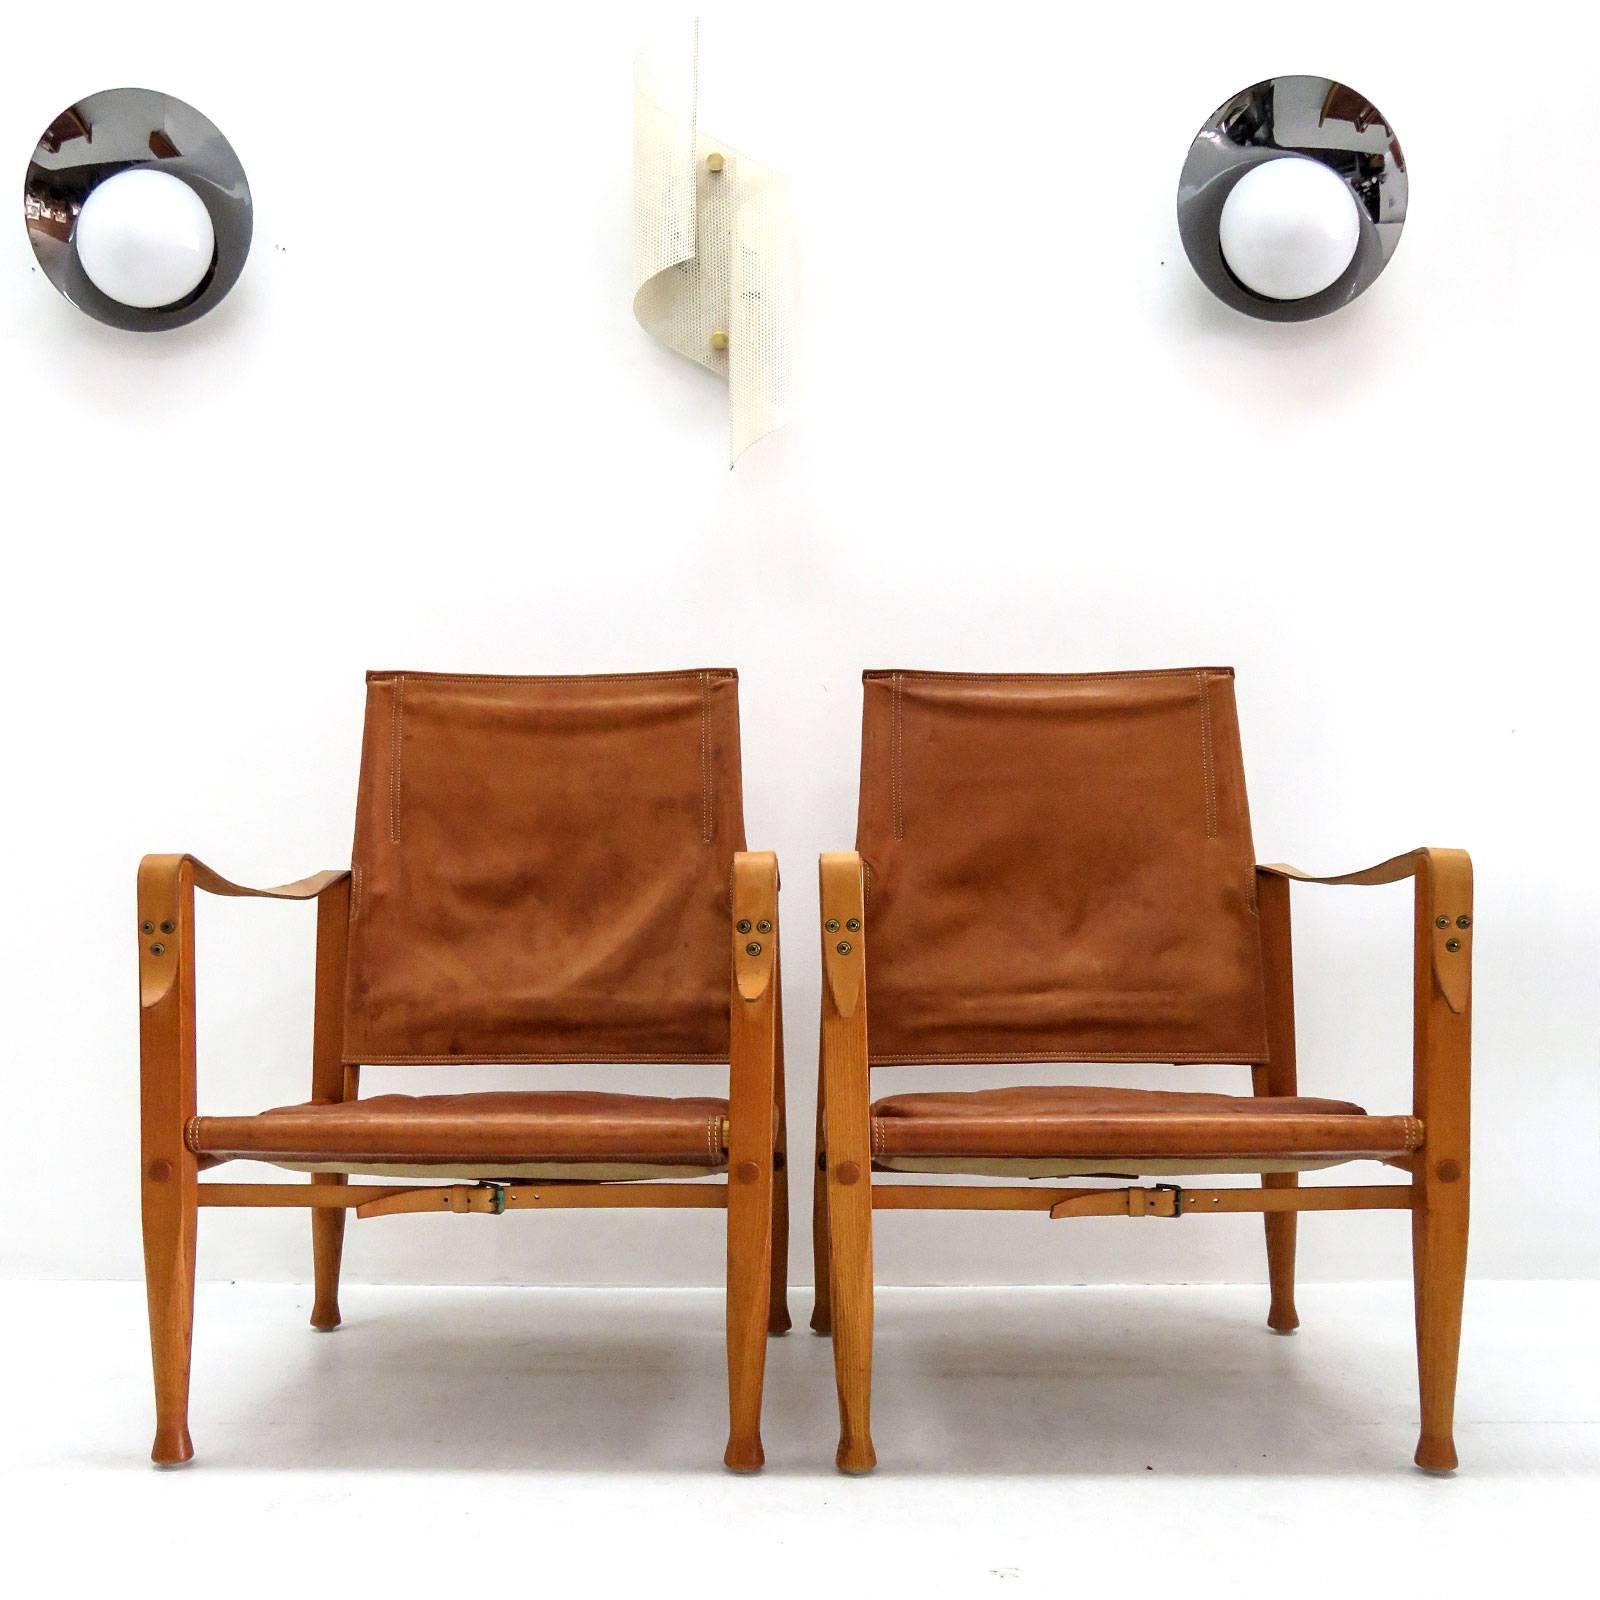 Stunning safari chair designed by Kaare Klint for Rud. Rasmussen's Snedkerier with patinated ash frame, seat, back, straps and loose cushions in patinated leather, designed in 1933, produced 1969, natural patina. One available.